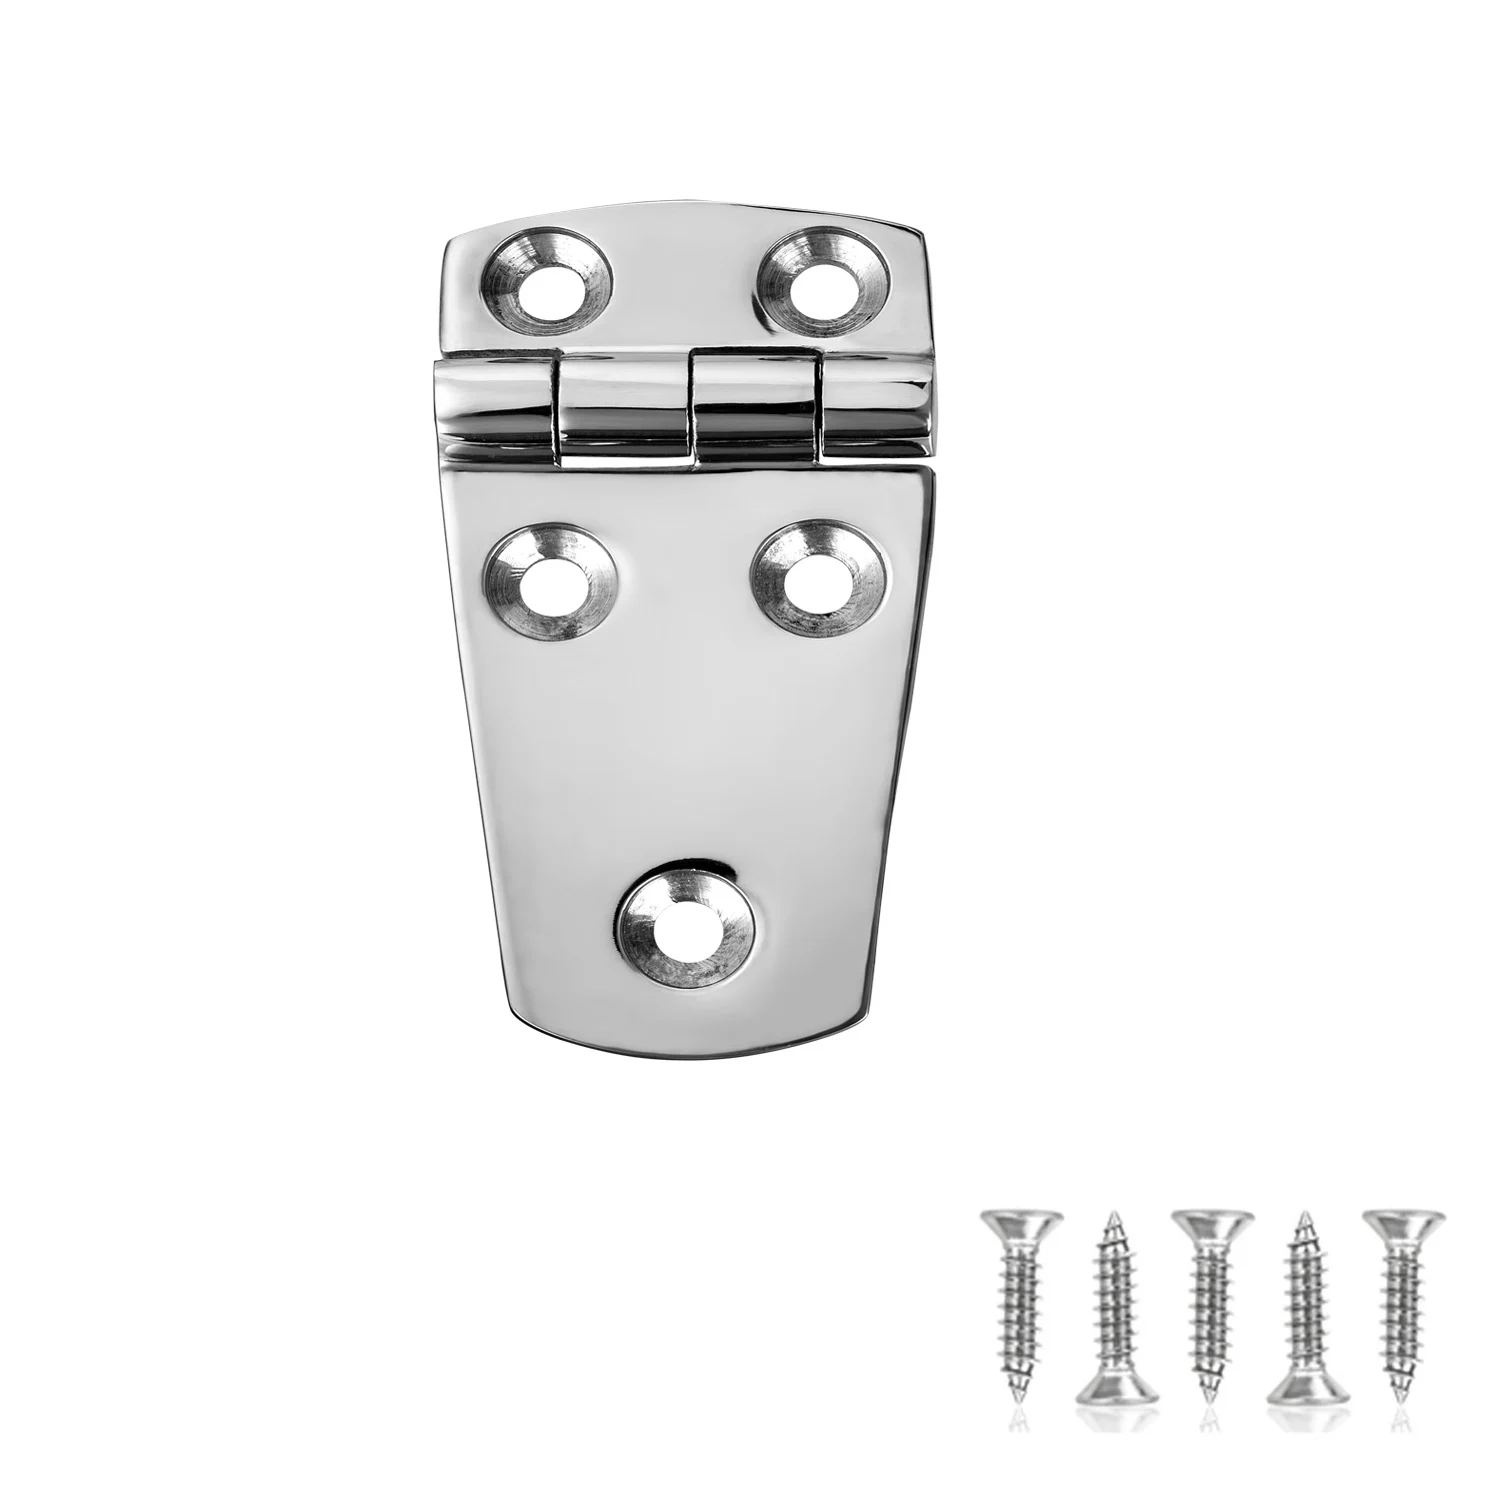 Marine Boat Hatch Hinges Stainless Steel, 3 Inch X 1.5 Inches(76 X 38MM) 5 Holes, No Noise, Heavy Duty 316 Ss with Screws 2pcs stainless steel 316 cast door strap hinge with 6 holes 76mm 102mm mirror polishing marine hinges boat hardware